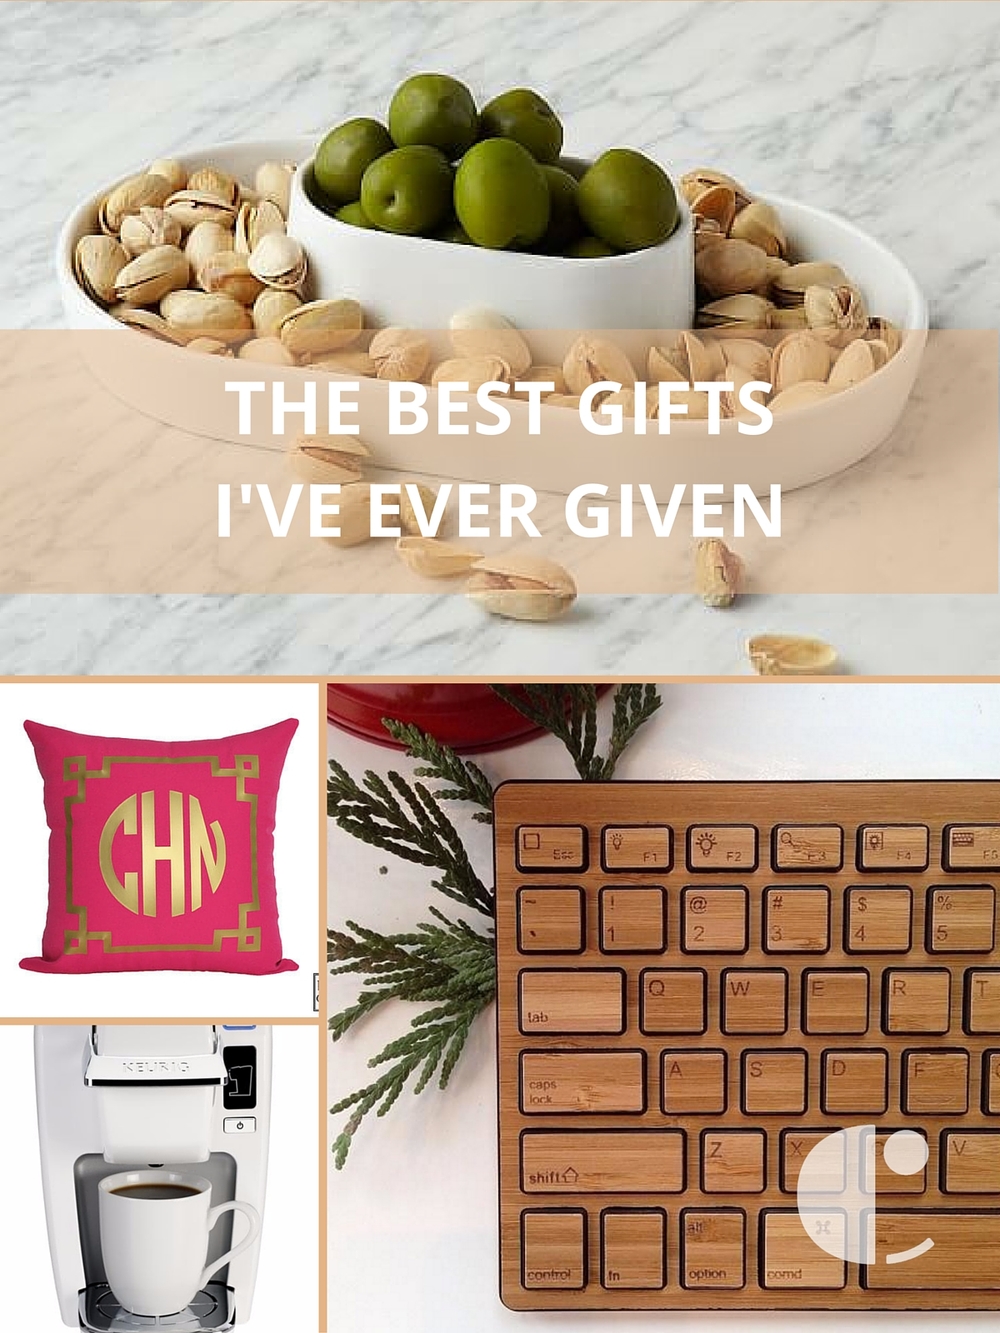 Most Well-Received Gifts I've Ever Given